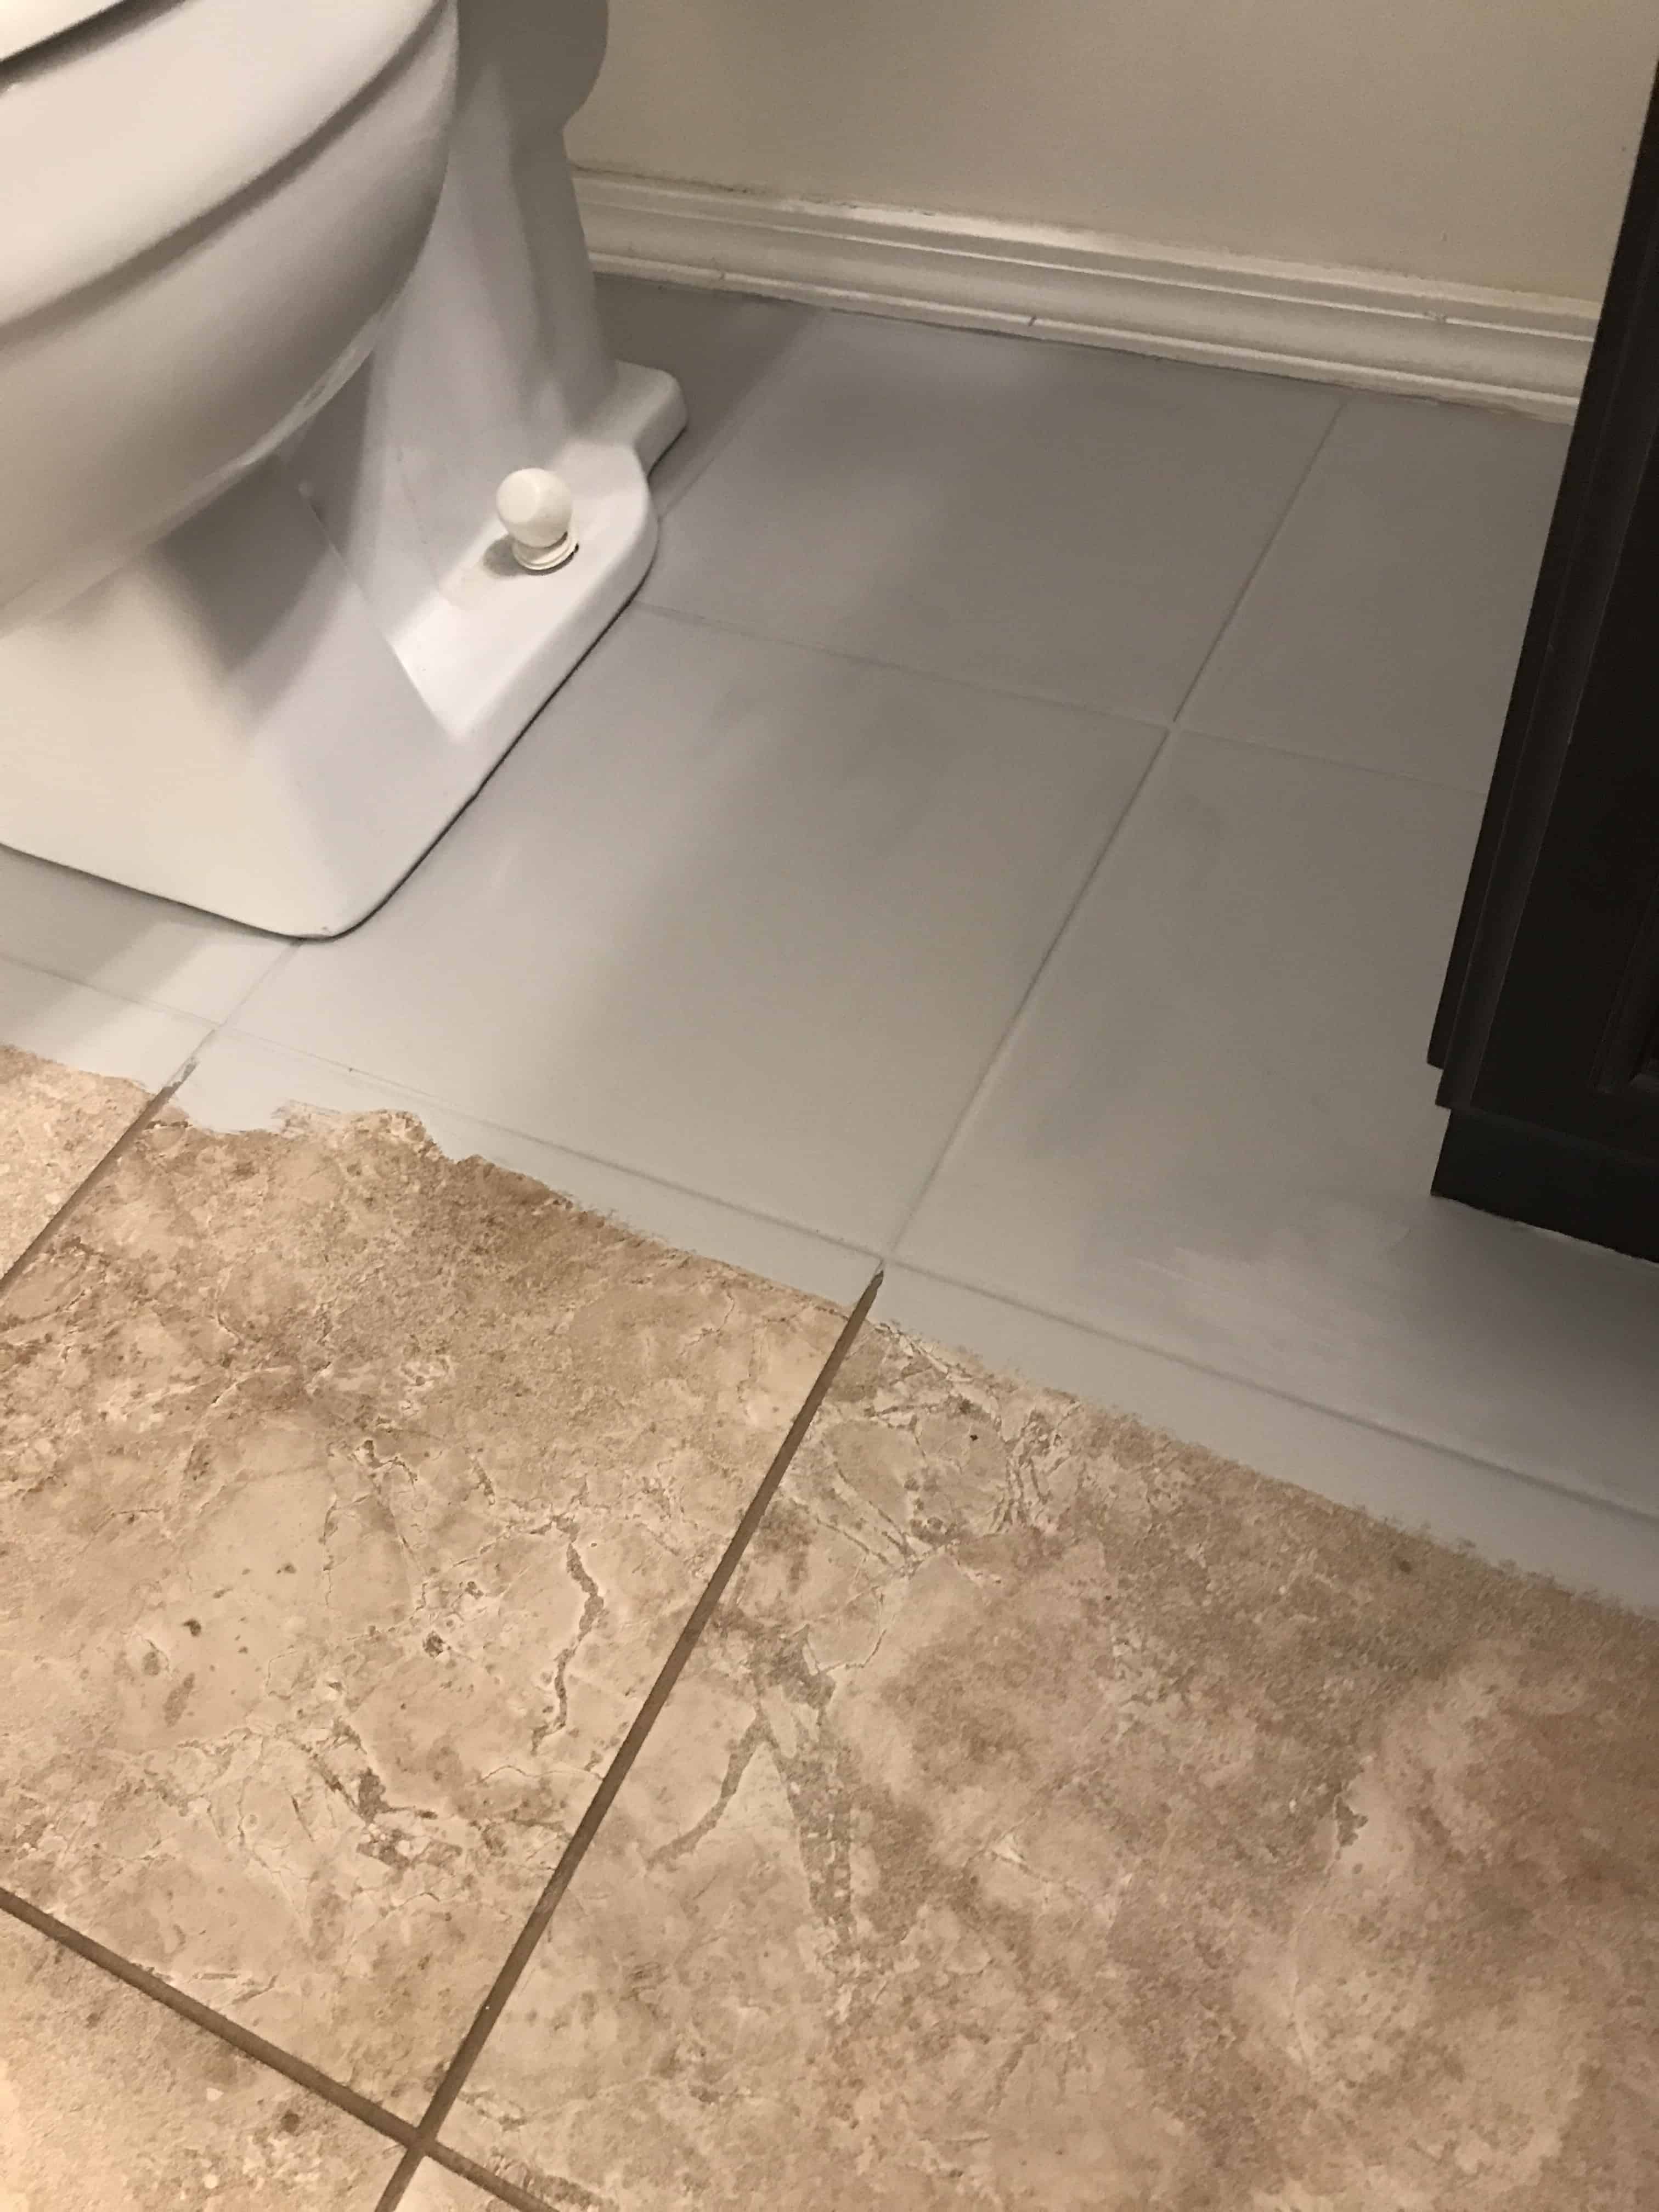 In progress picture of tile floors being painted grey